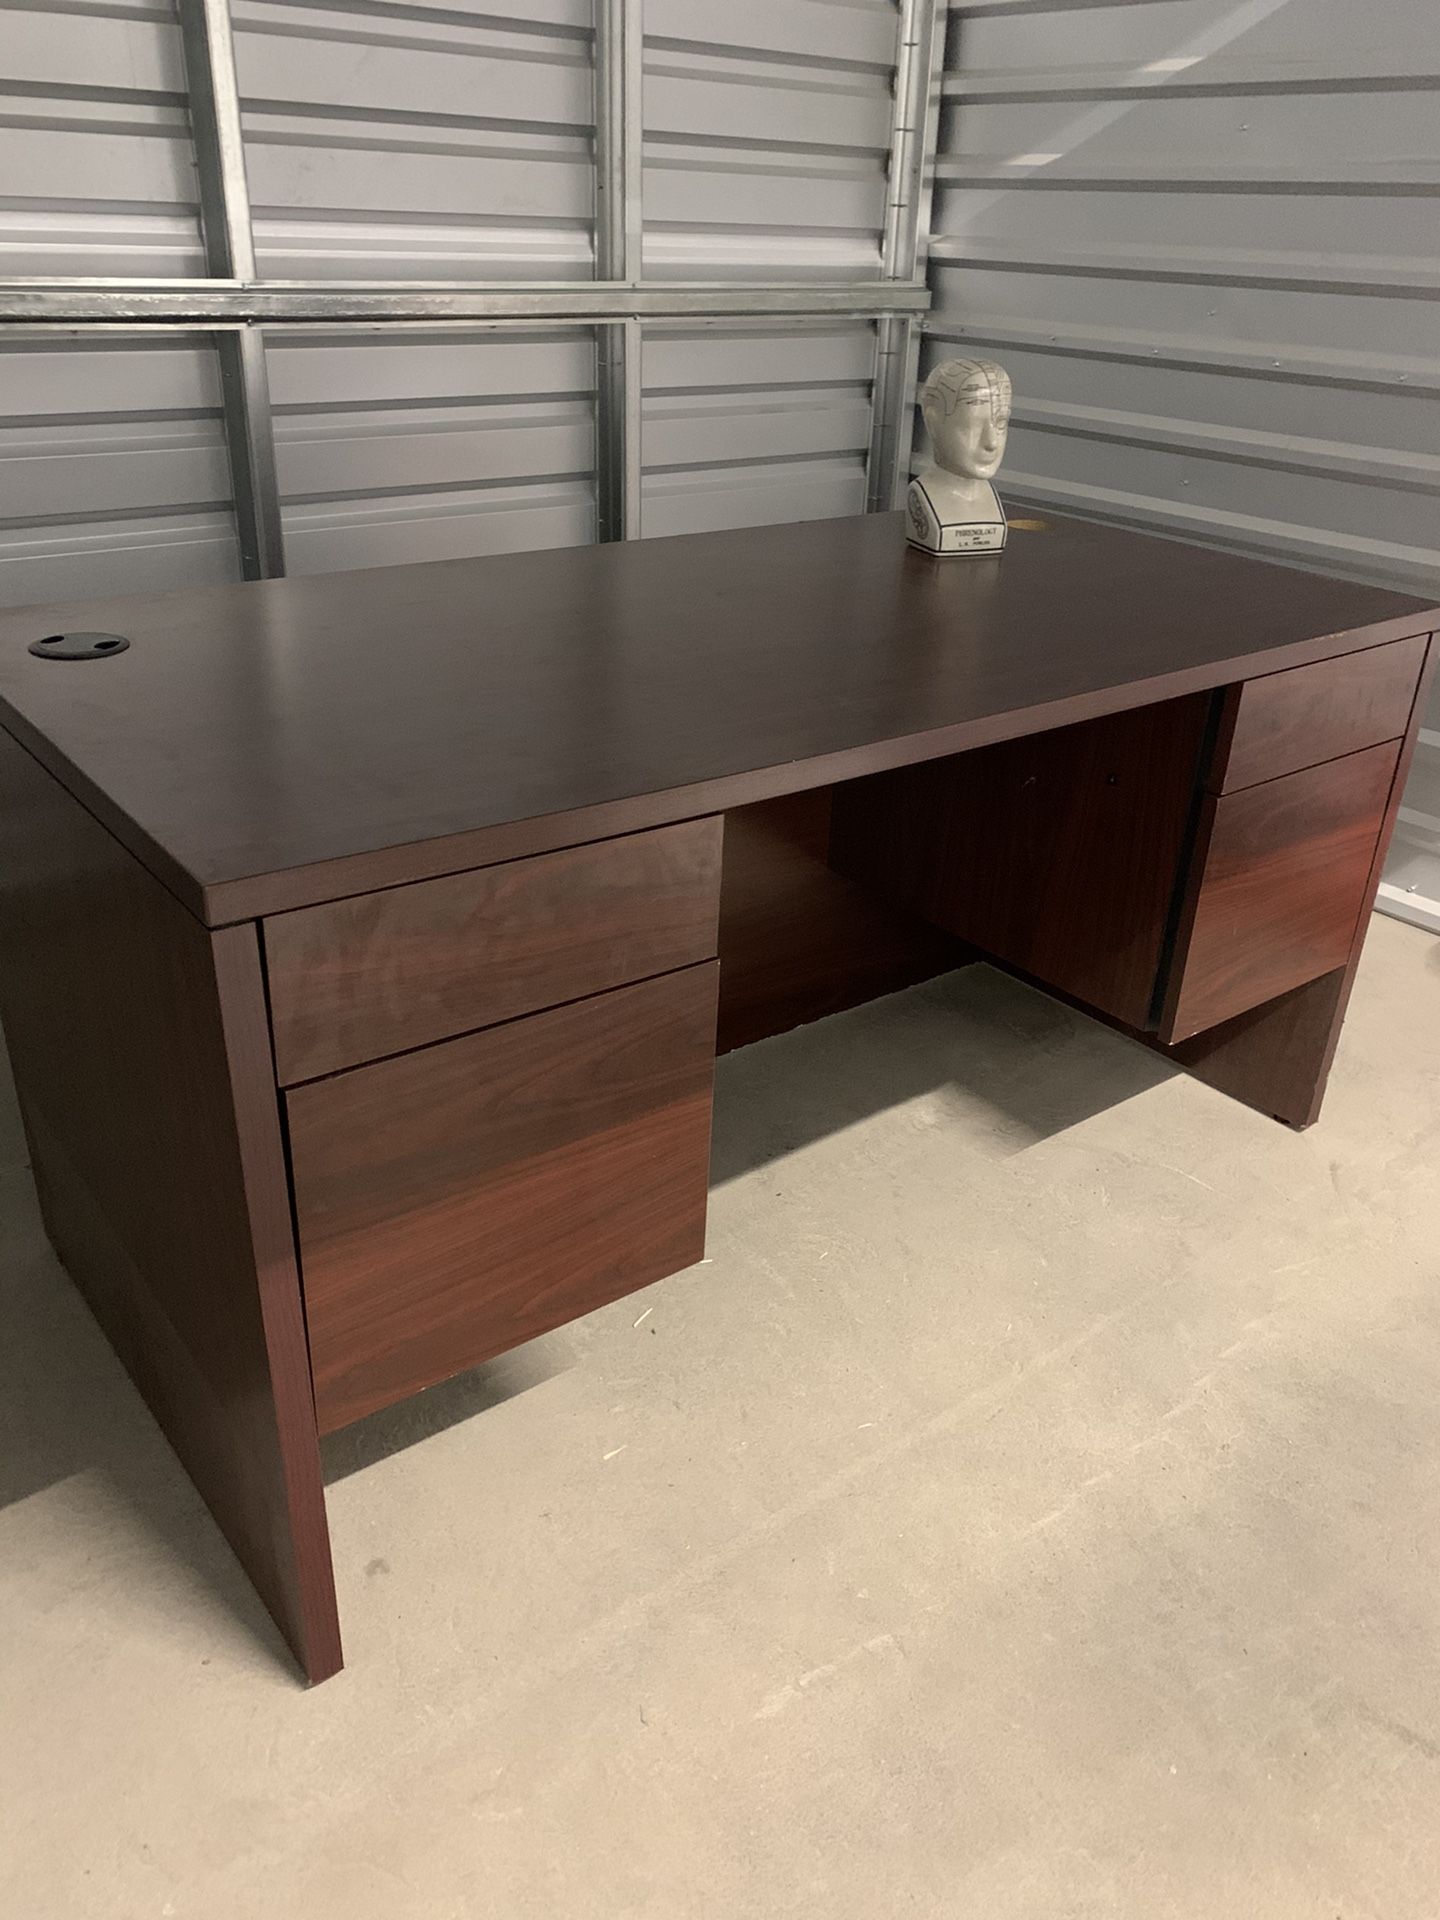 Executive Desk Like New With Some Scuffing But Barely Used!